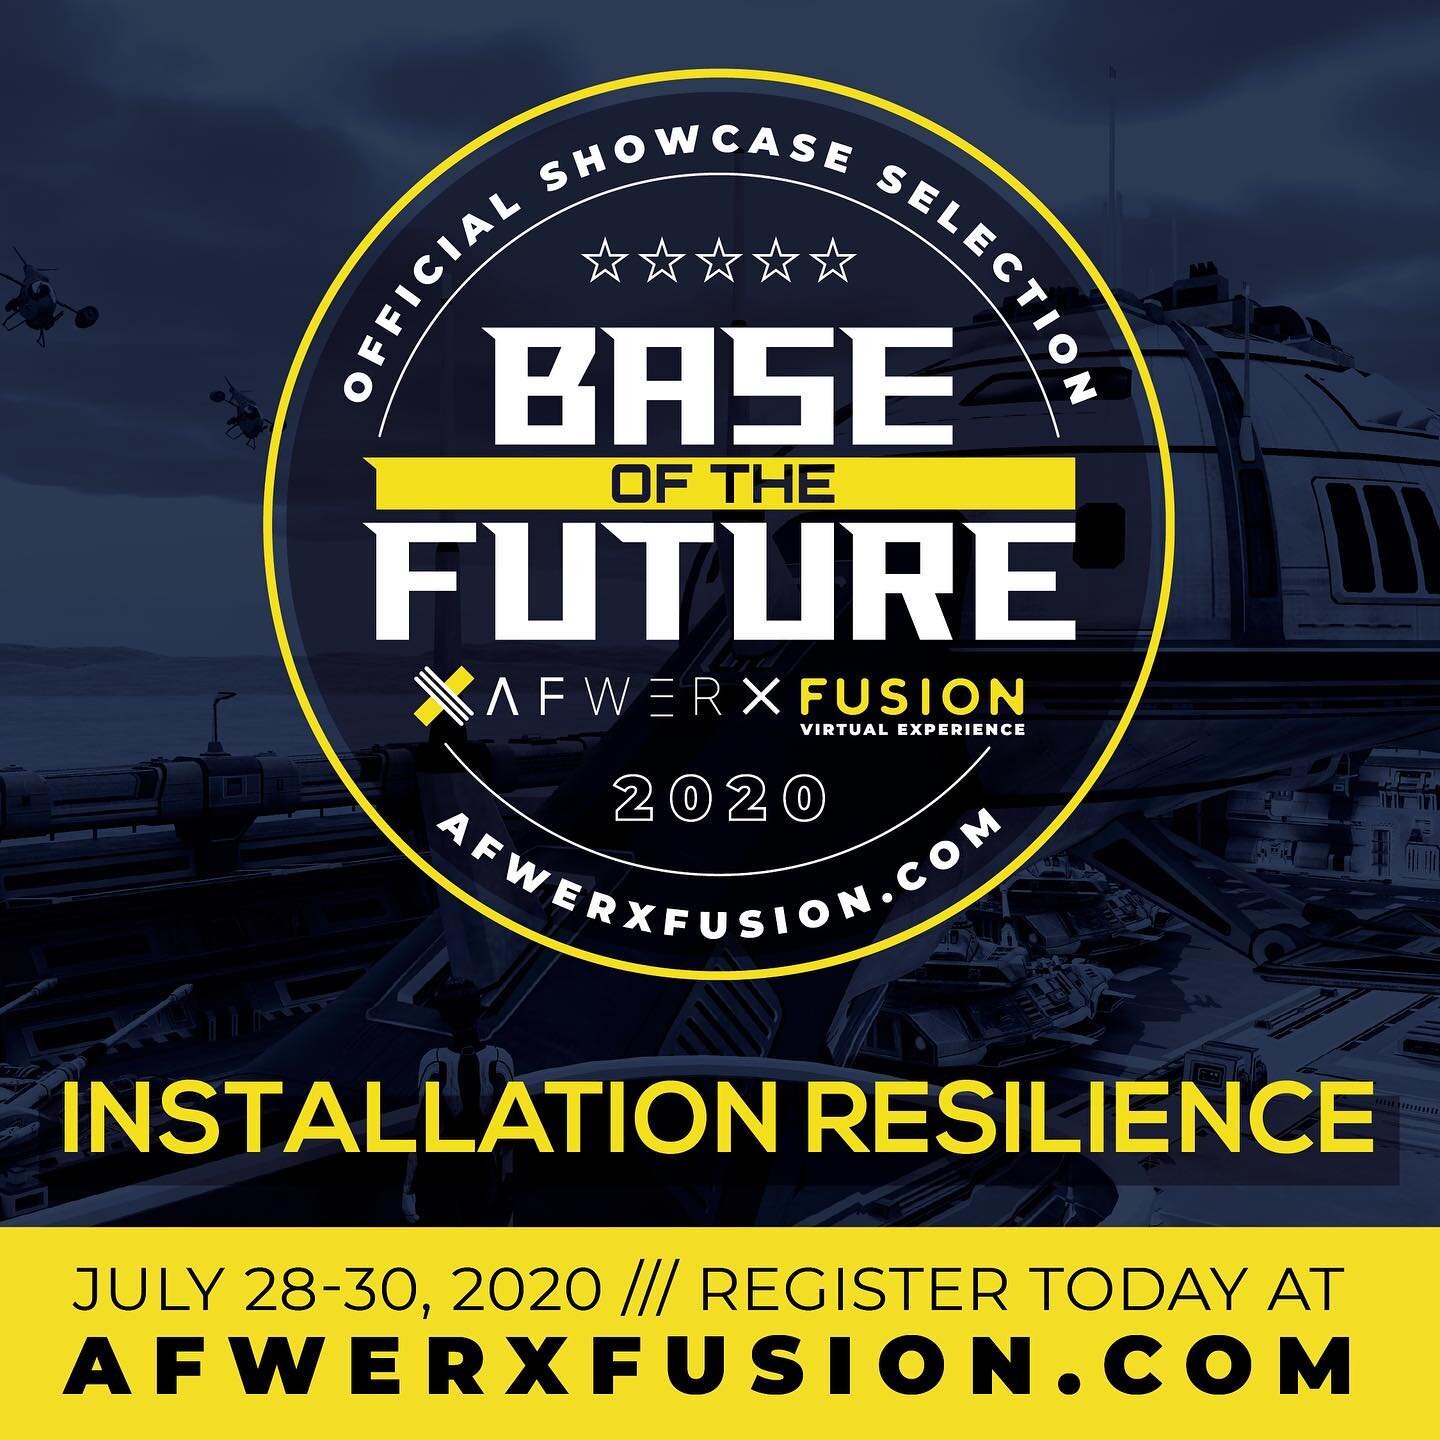 Head over to the upriseenergy.com/blog to read about our inclusion in the AFWERX Fusion Showcase that is focused on creating the Base of the Future.

#afwerxfusion2020 #botfchallengeshowcase 
#cleantech #distributedenergy #der #renewableenergy